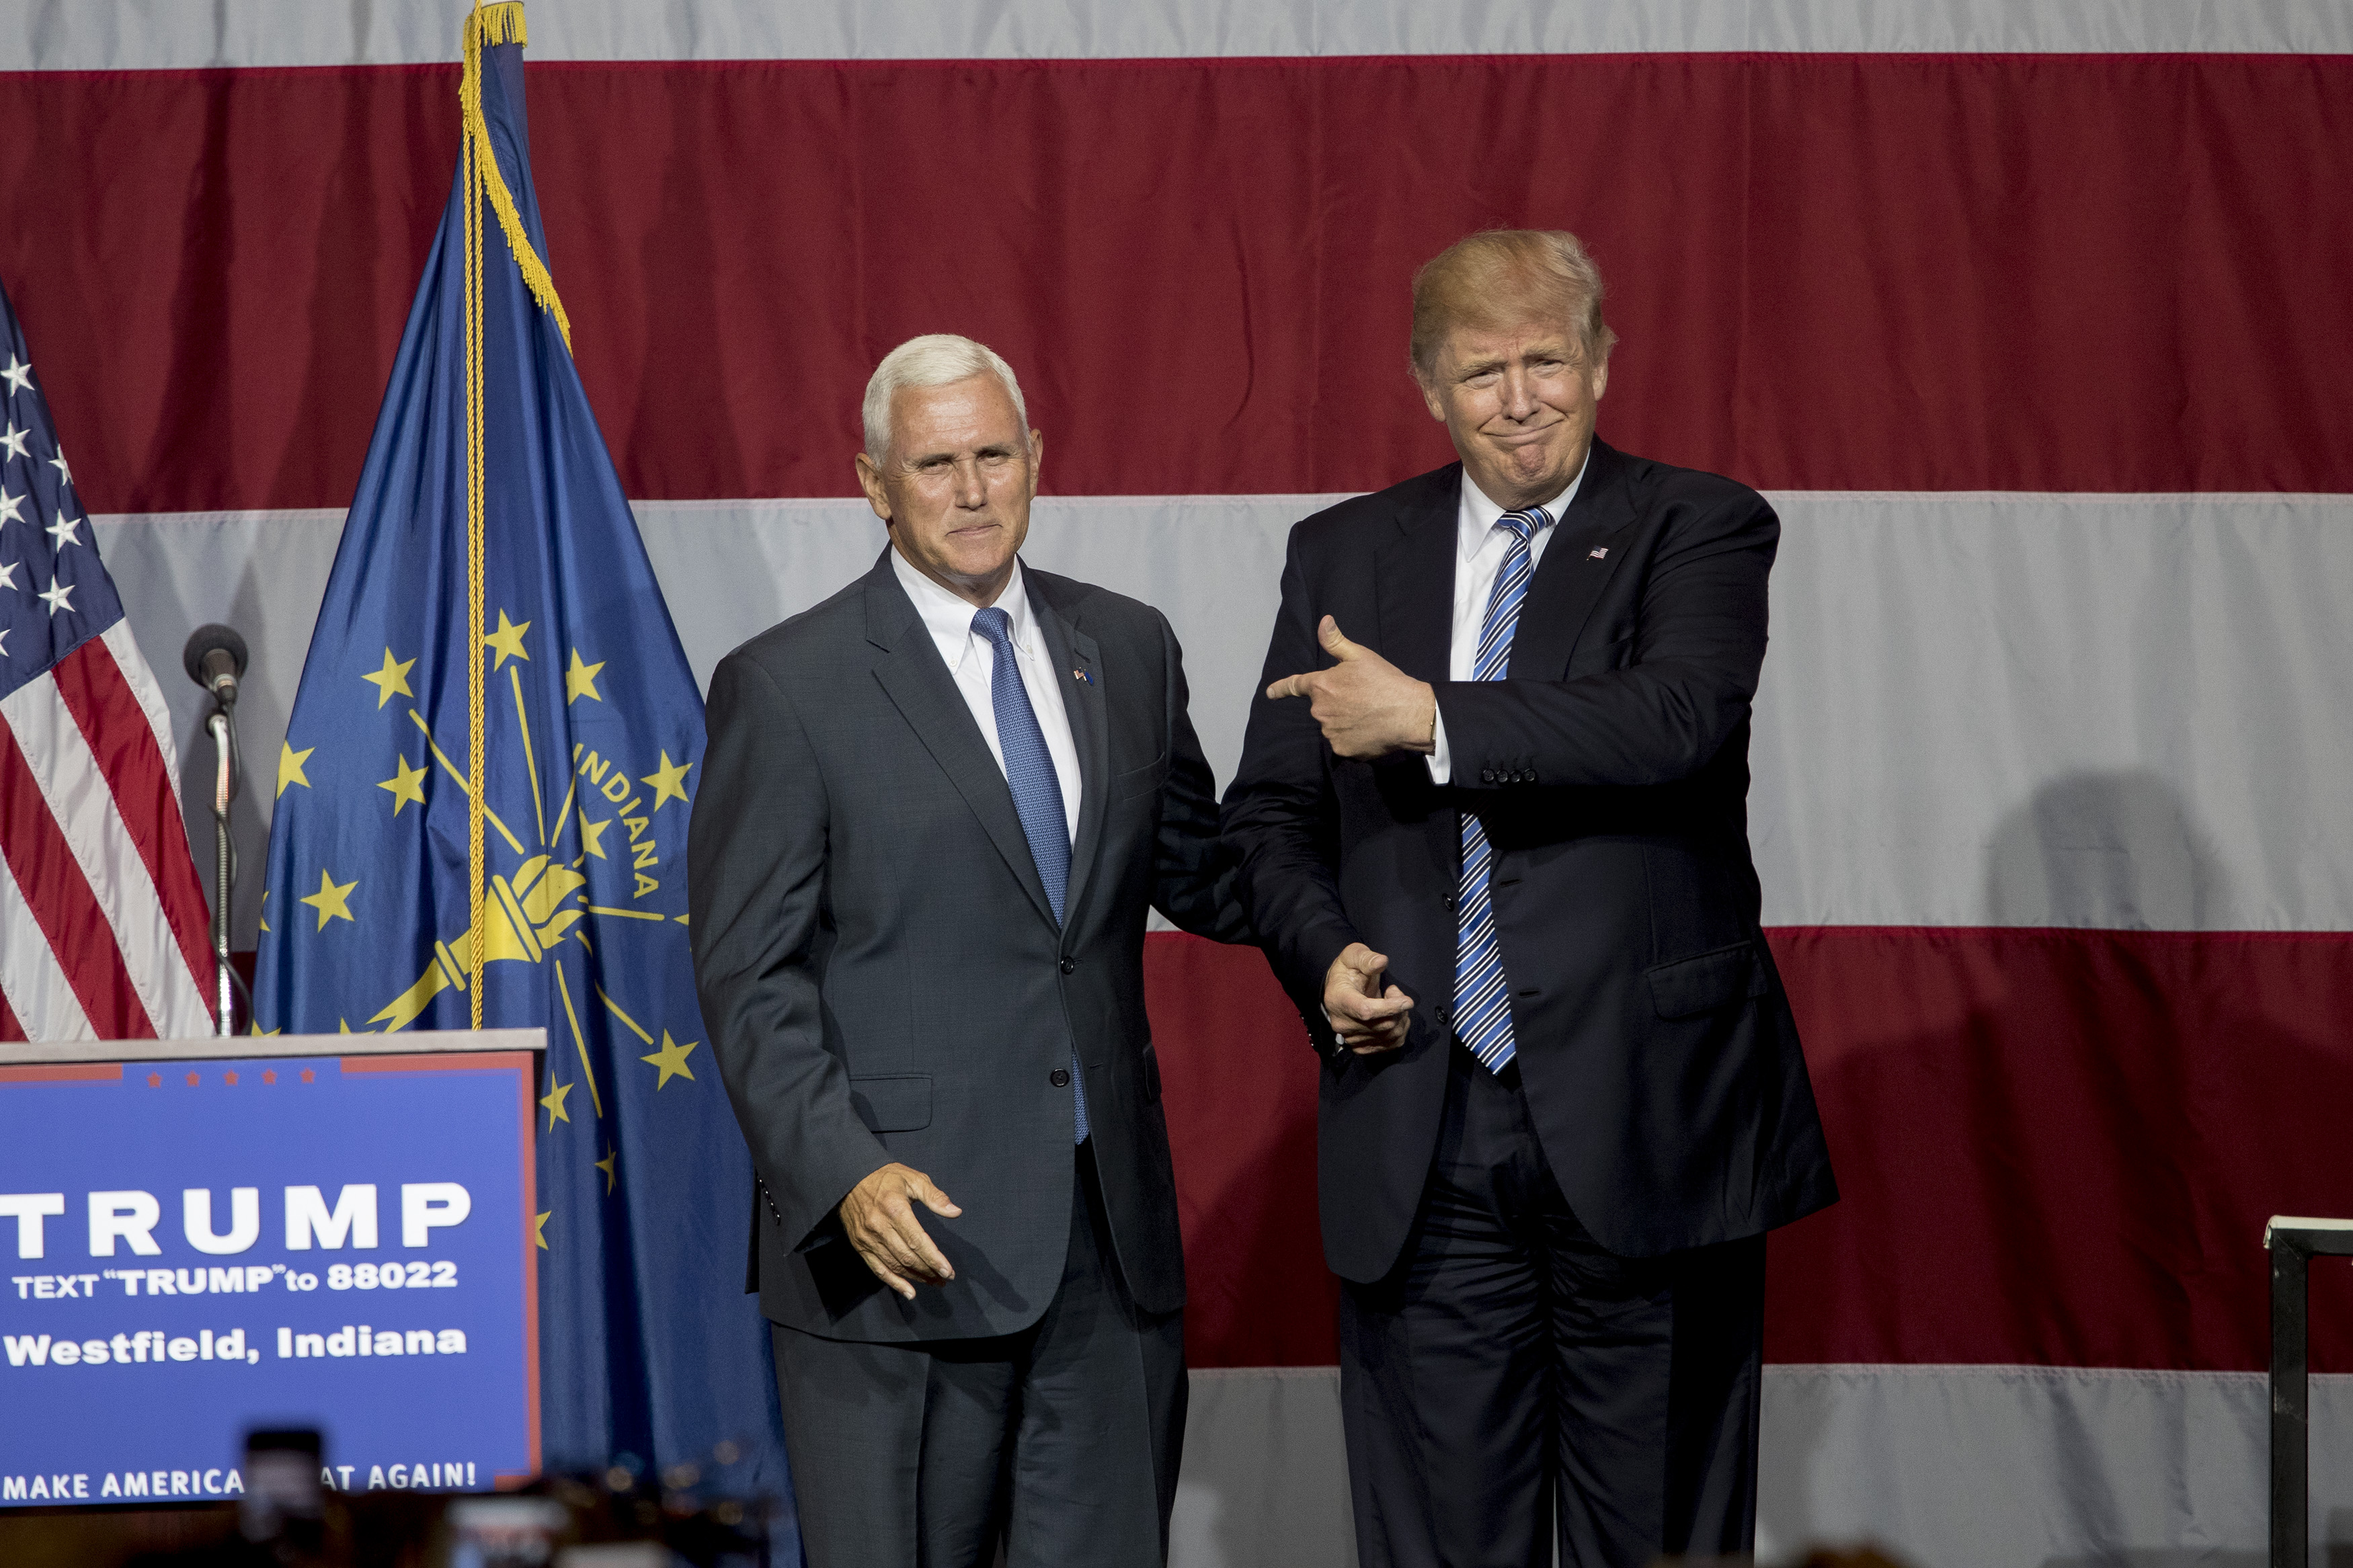 3 Ways to Gauge VP Candidate Mike Pence’s Stance on Reproductive Health & LGBT Issues